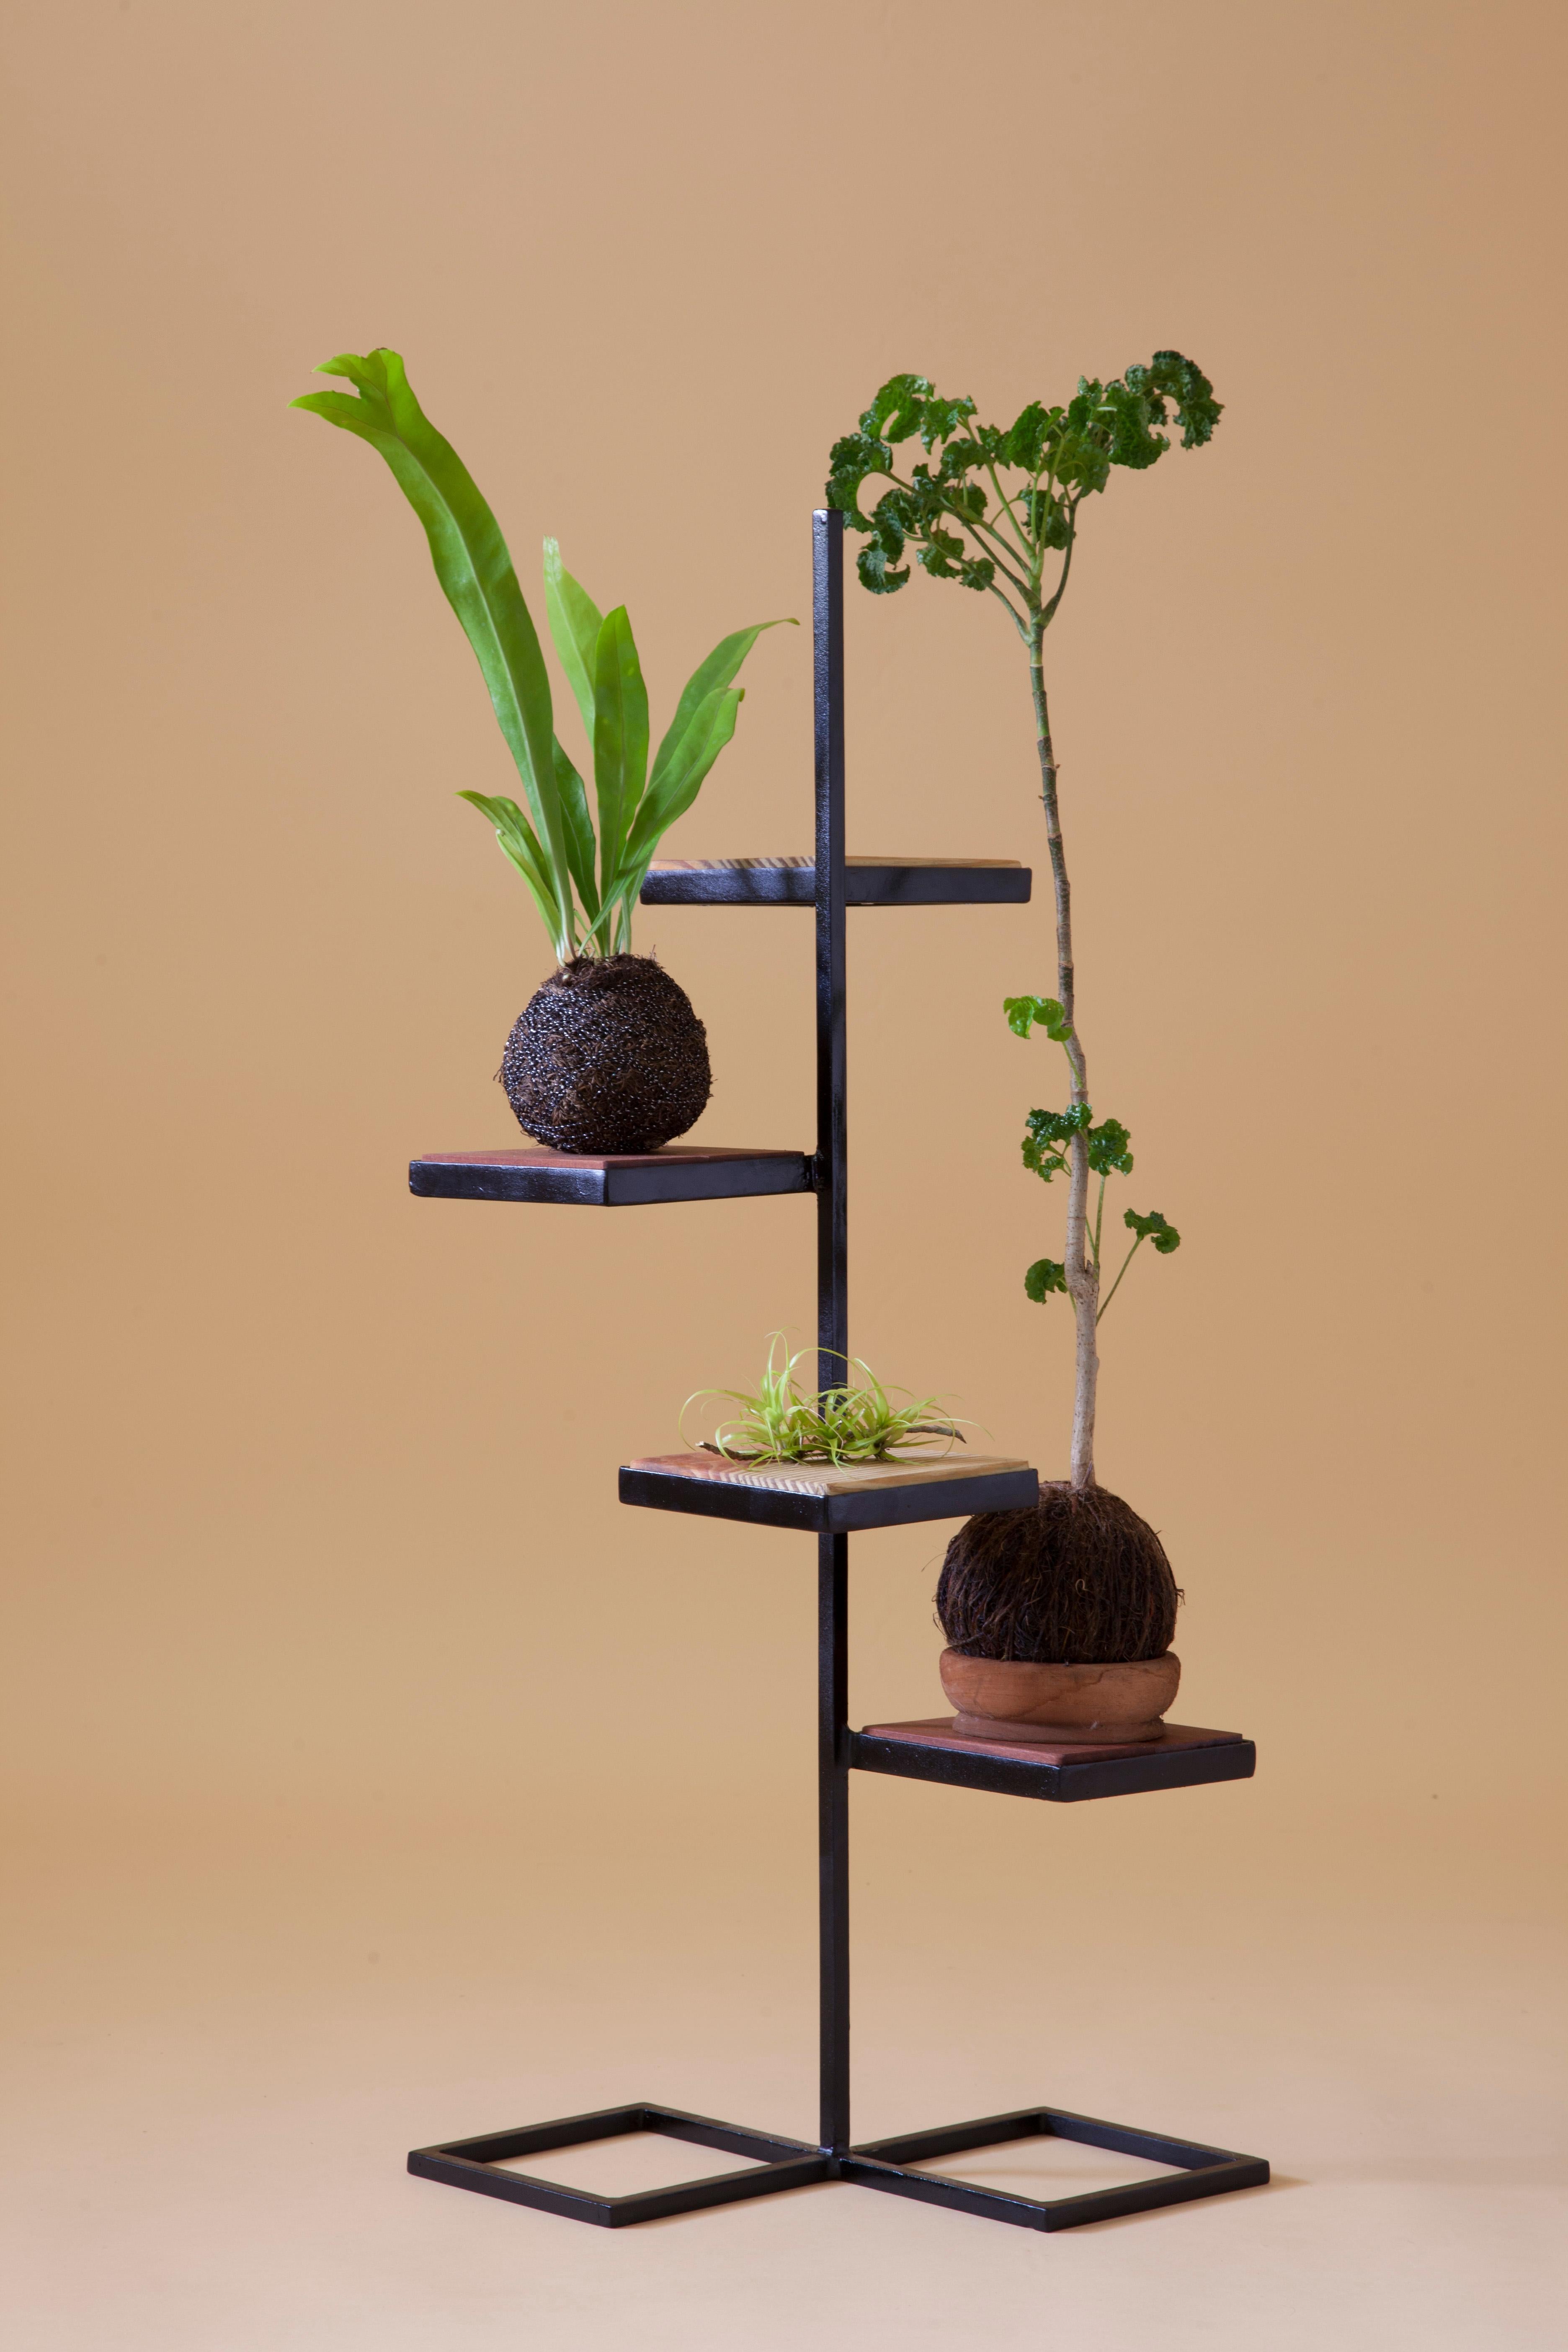 Aurea plant stand 3 by Sofia Alvarado
Limited edition 1 of 10 (one in stock)
Materials: Metal & Woods / Golden, white or black.
Dimensions: 86cm (H) x 32cm (W) x 32cm (D)

FI is an ornamental artist who embodies the creative revelation of the